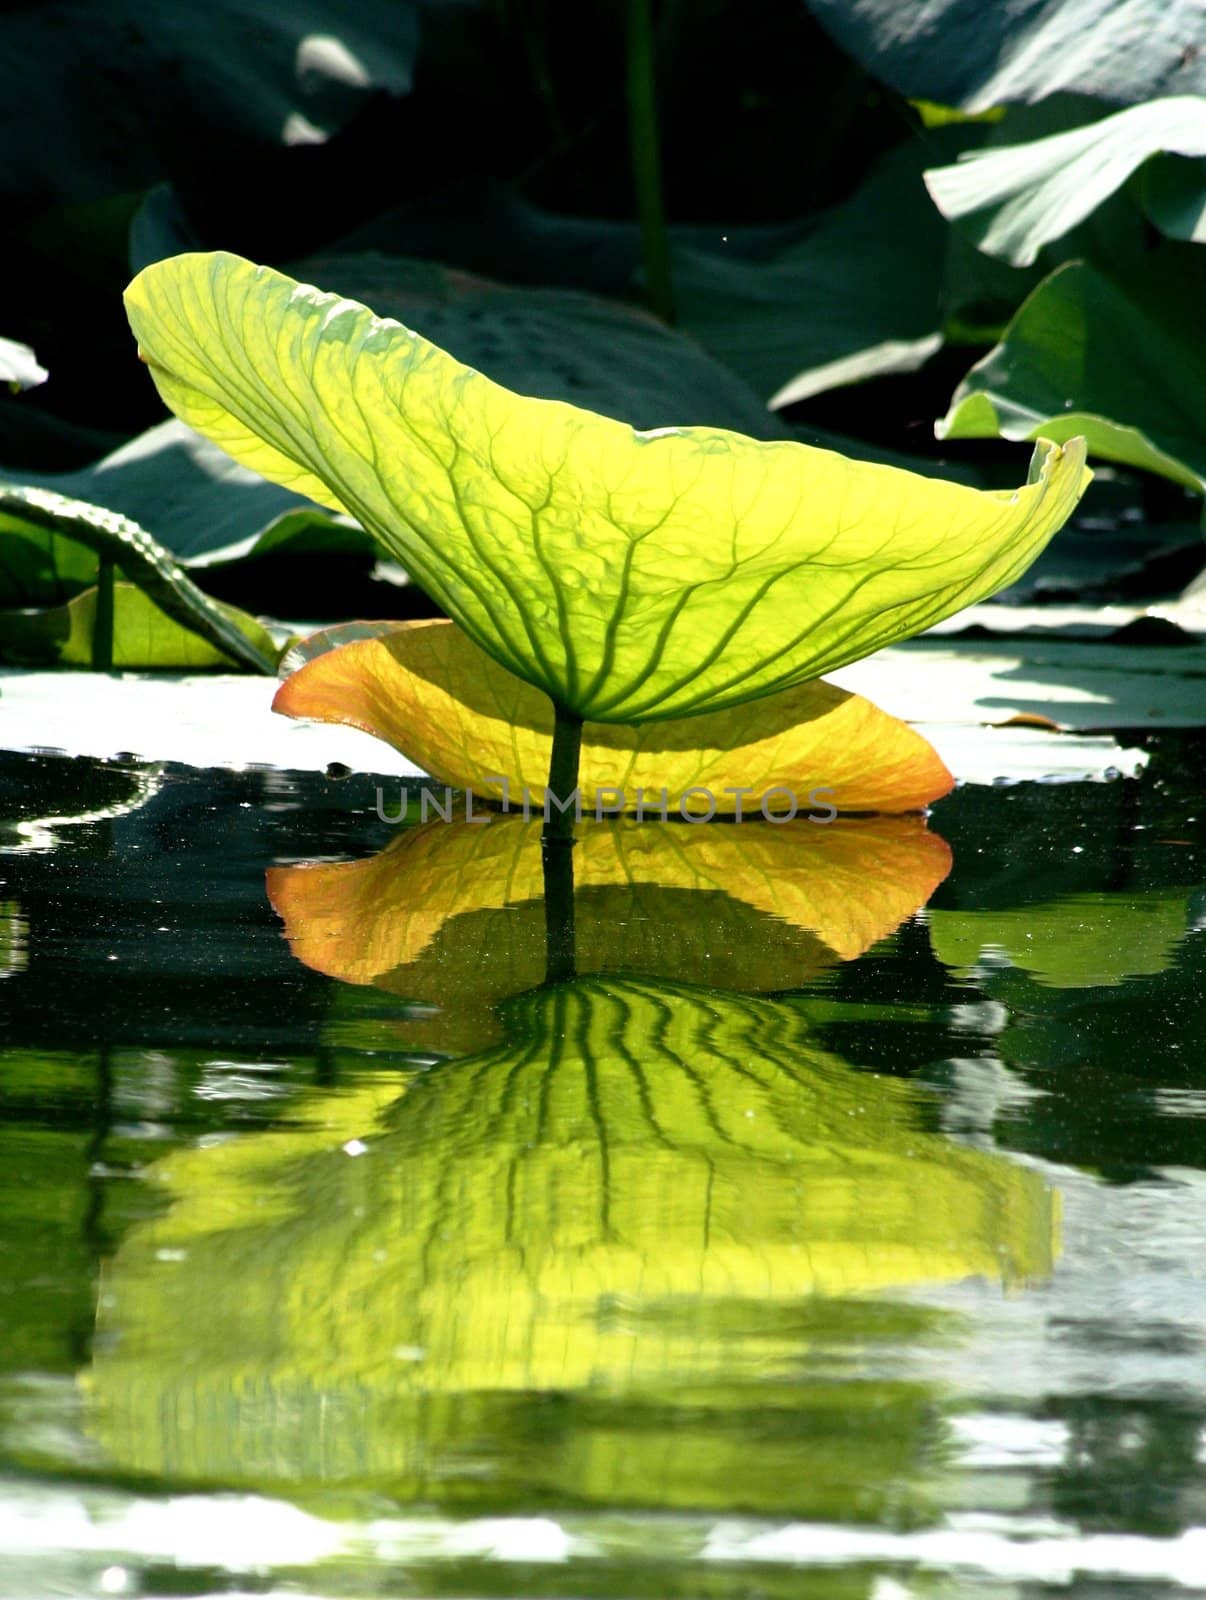 Lotus leaf reflection in the lake